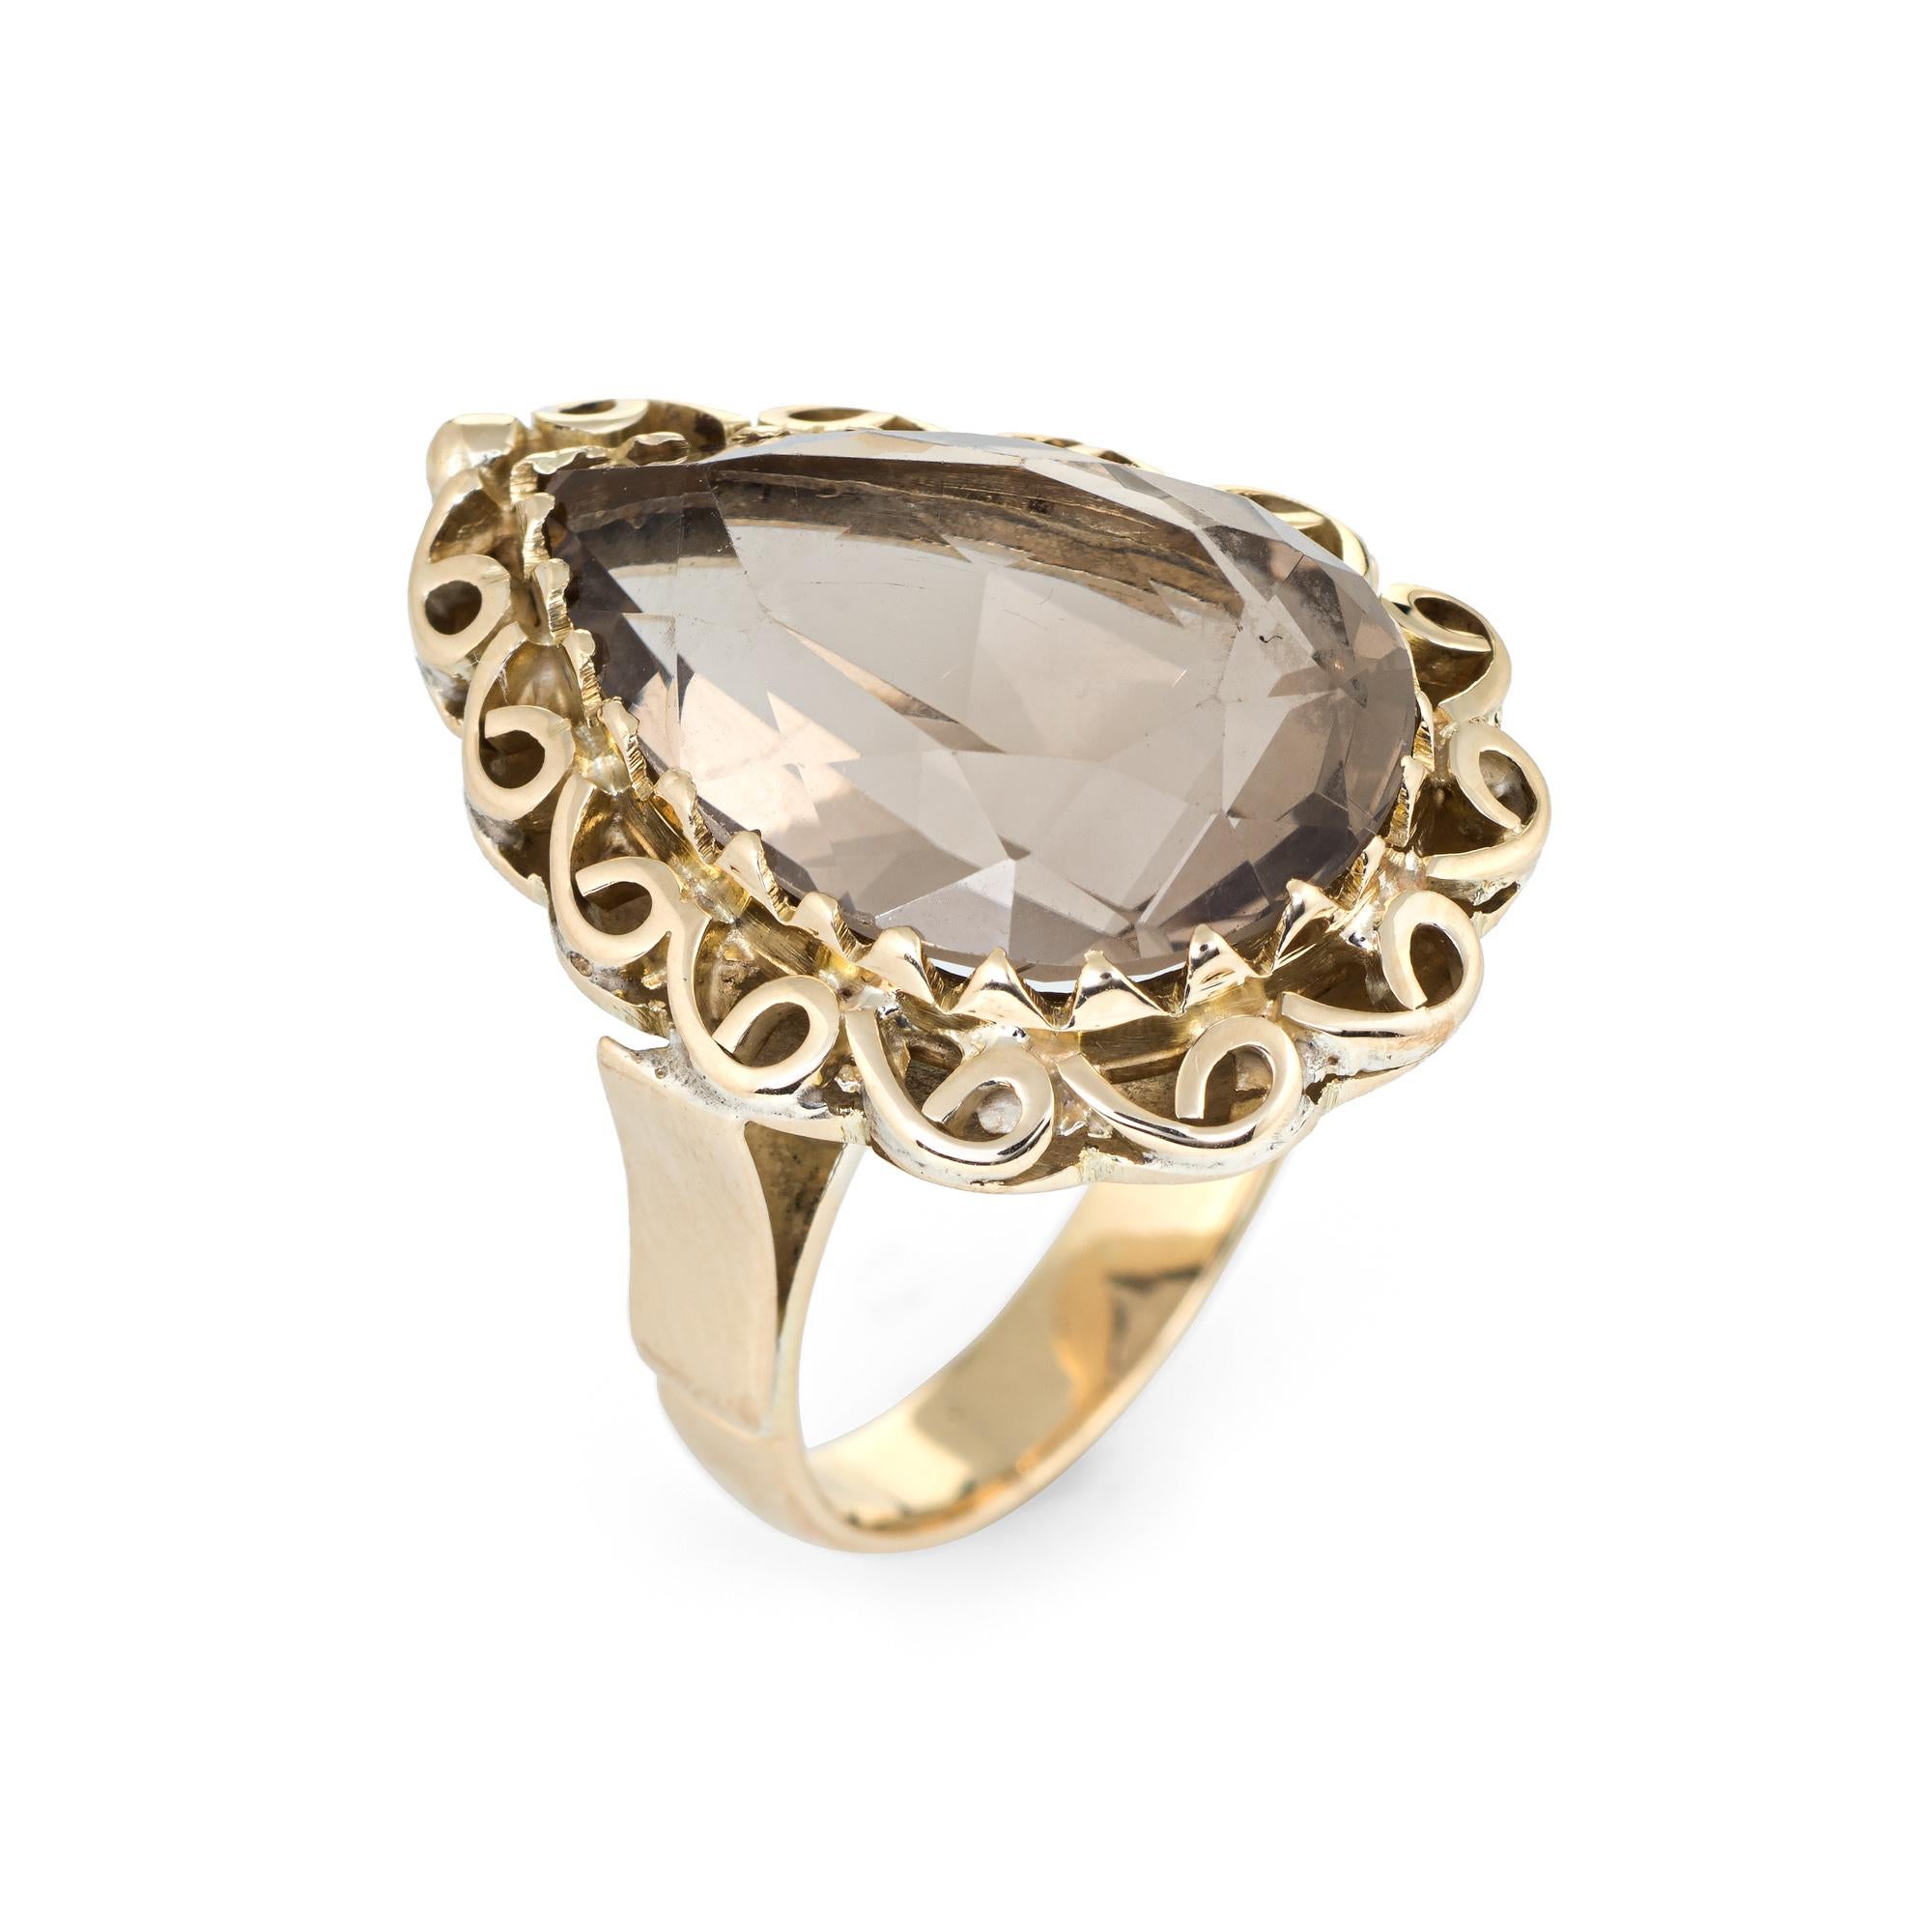 Elegant vintage smoky quartz cocktail ring (circa 1960s to 1970s), crafted in 14 karat yellow gold. 

Faceted pear cut smoky quartz measures 19mm x 13mm (estimated at 15 carats). The quartz is in excellent condition and free of cracks or chips.

The